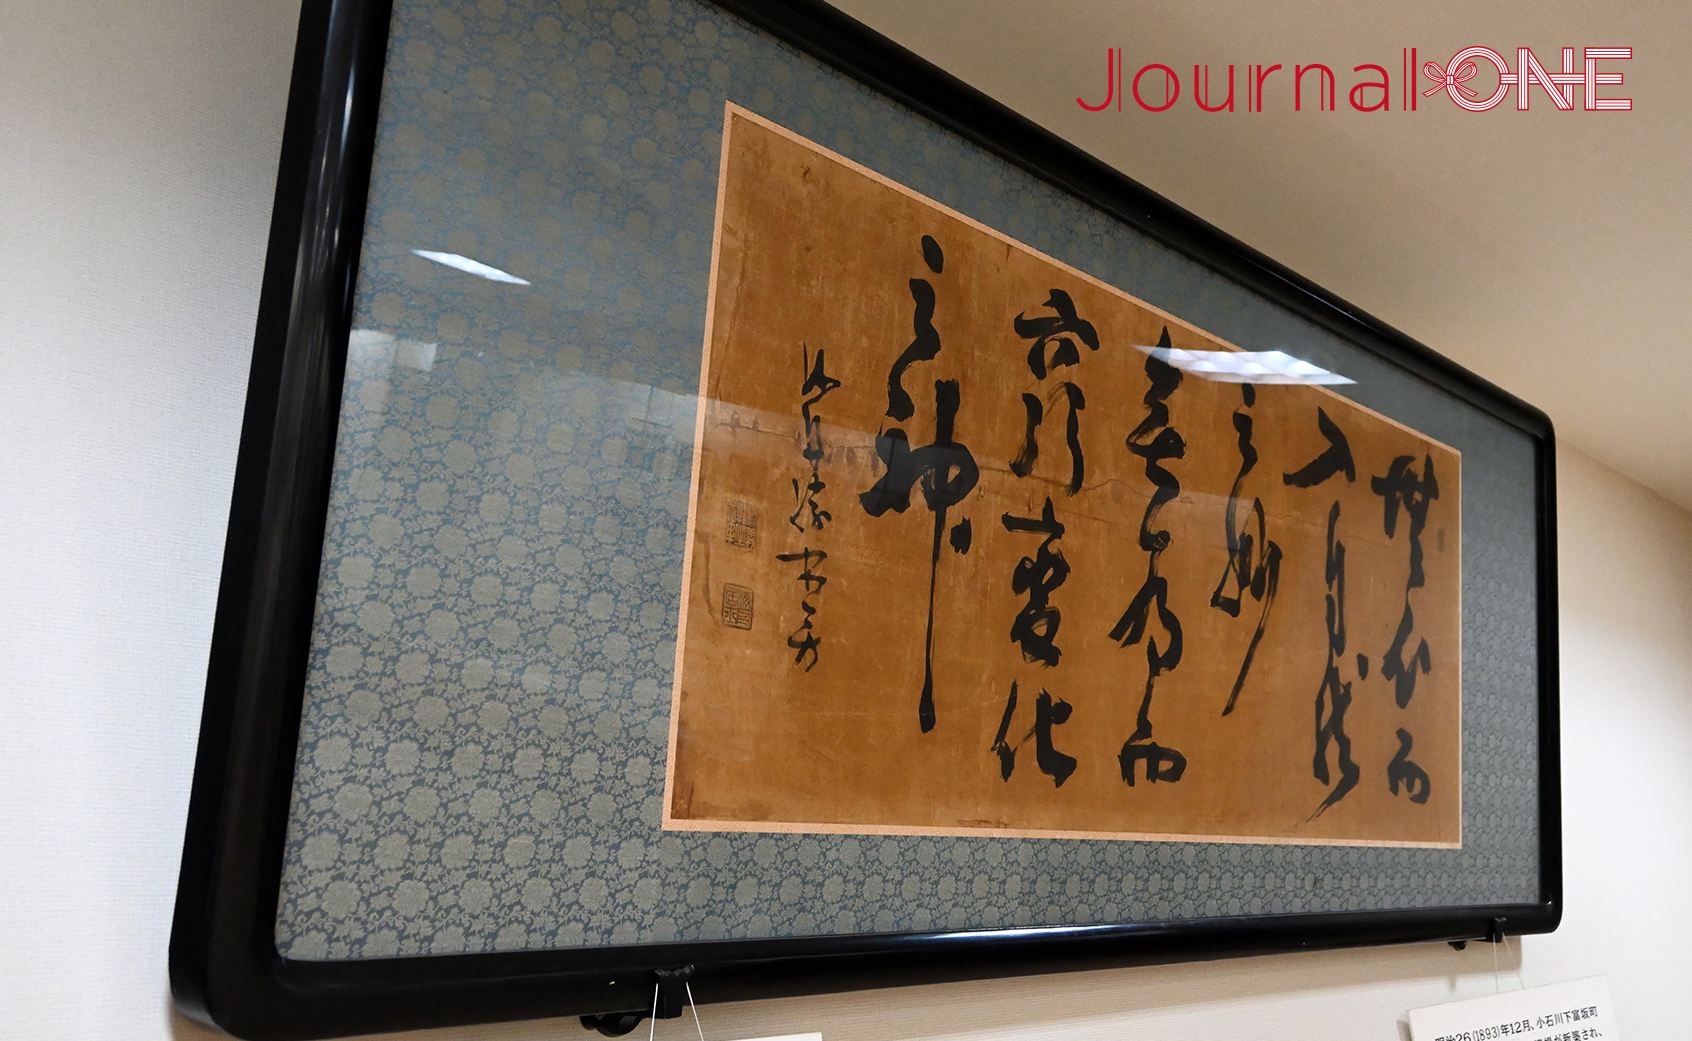 This was written by Kaishu Katsu; a great figure who played an important role in the Meiji Restoration at the Kodokan Judo Museum and Library:Photo by Journal-ONE